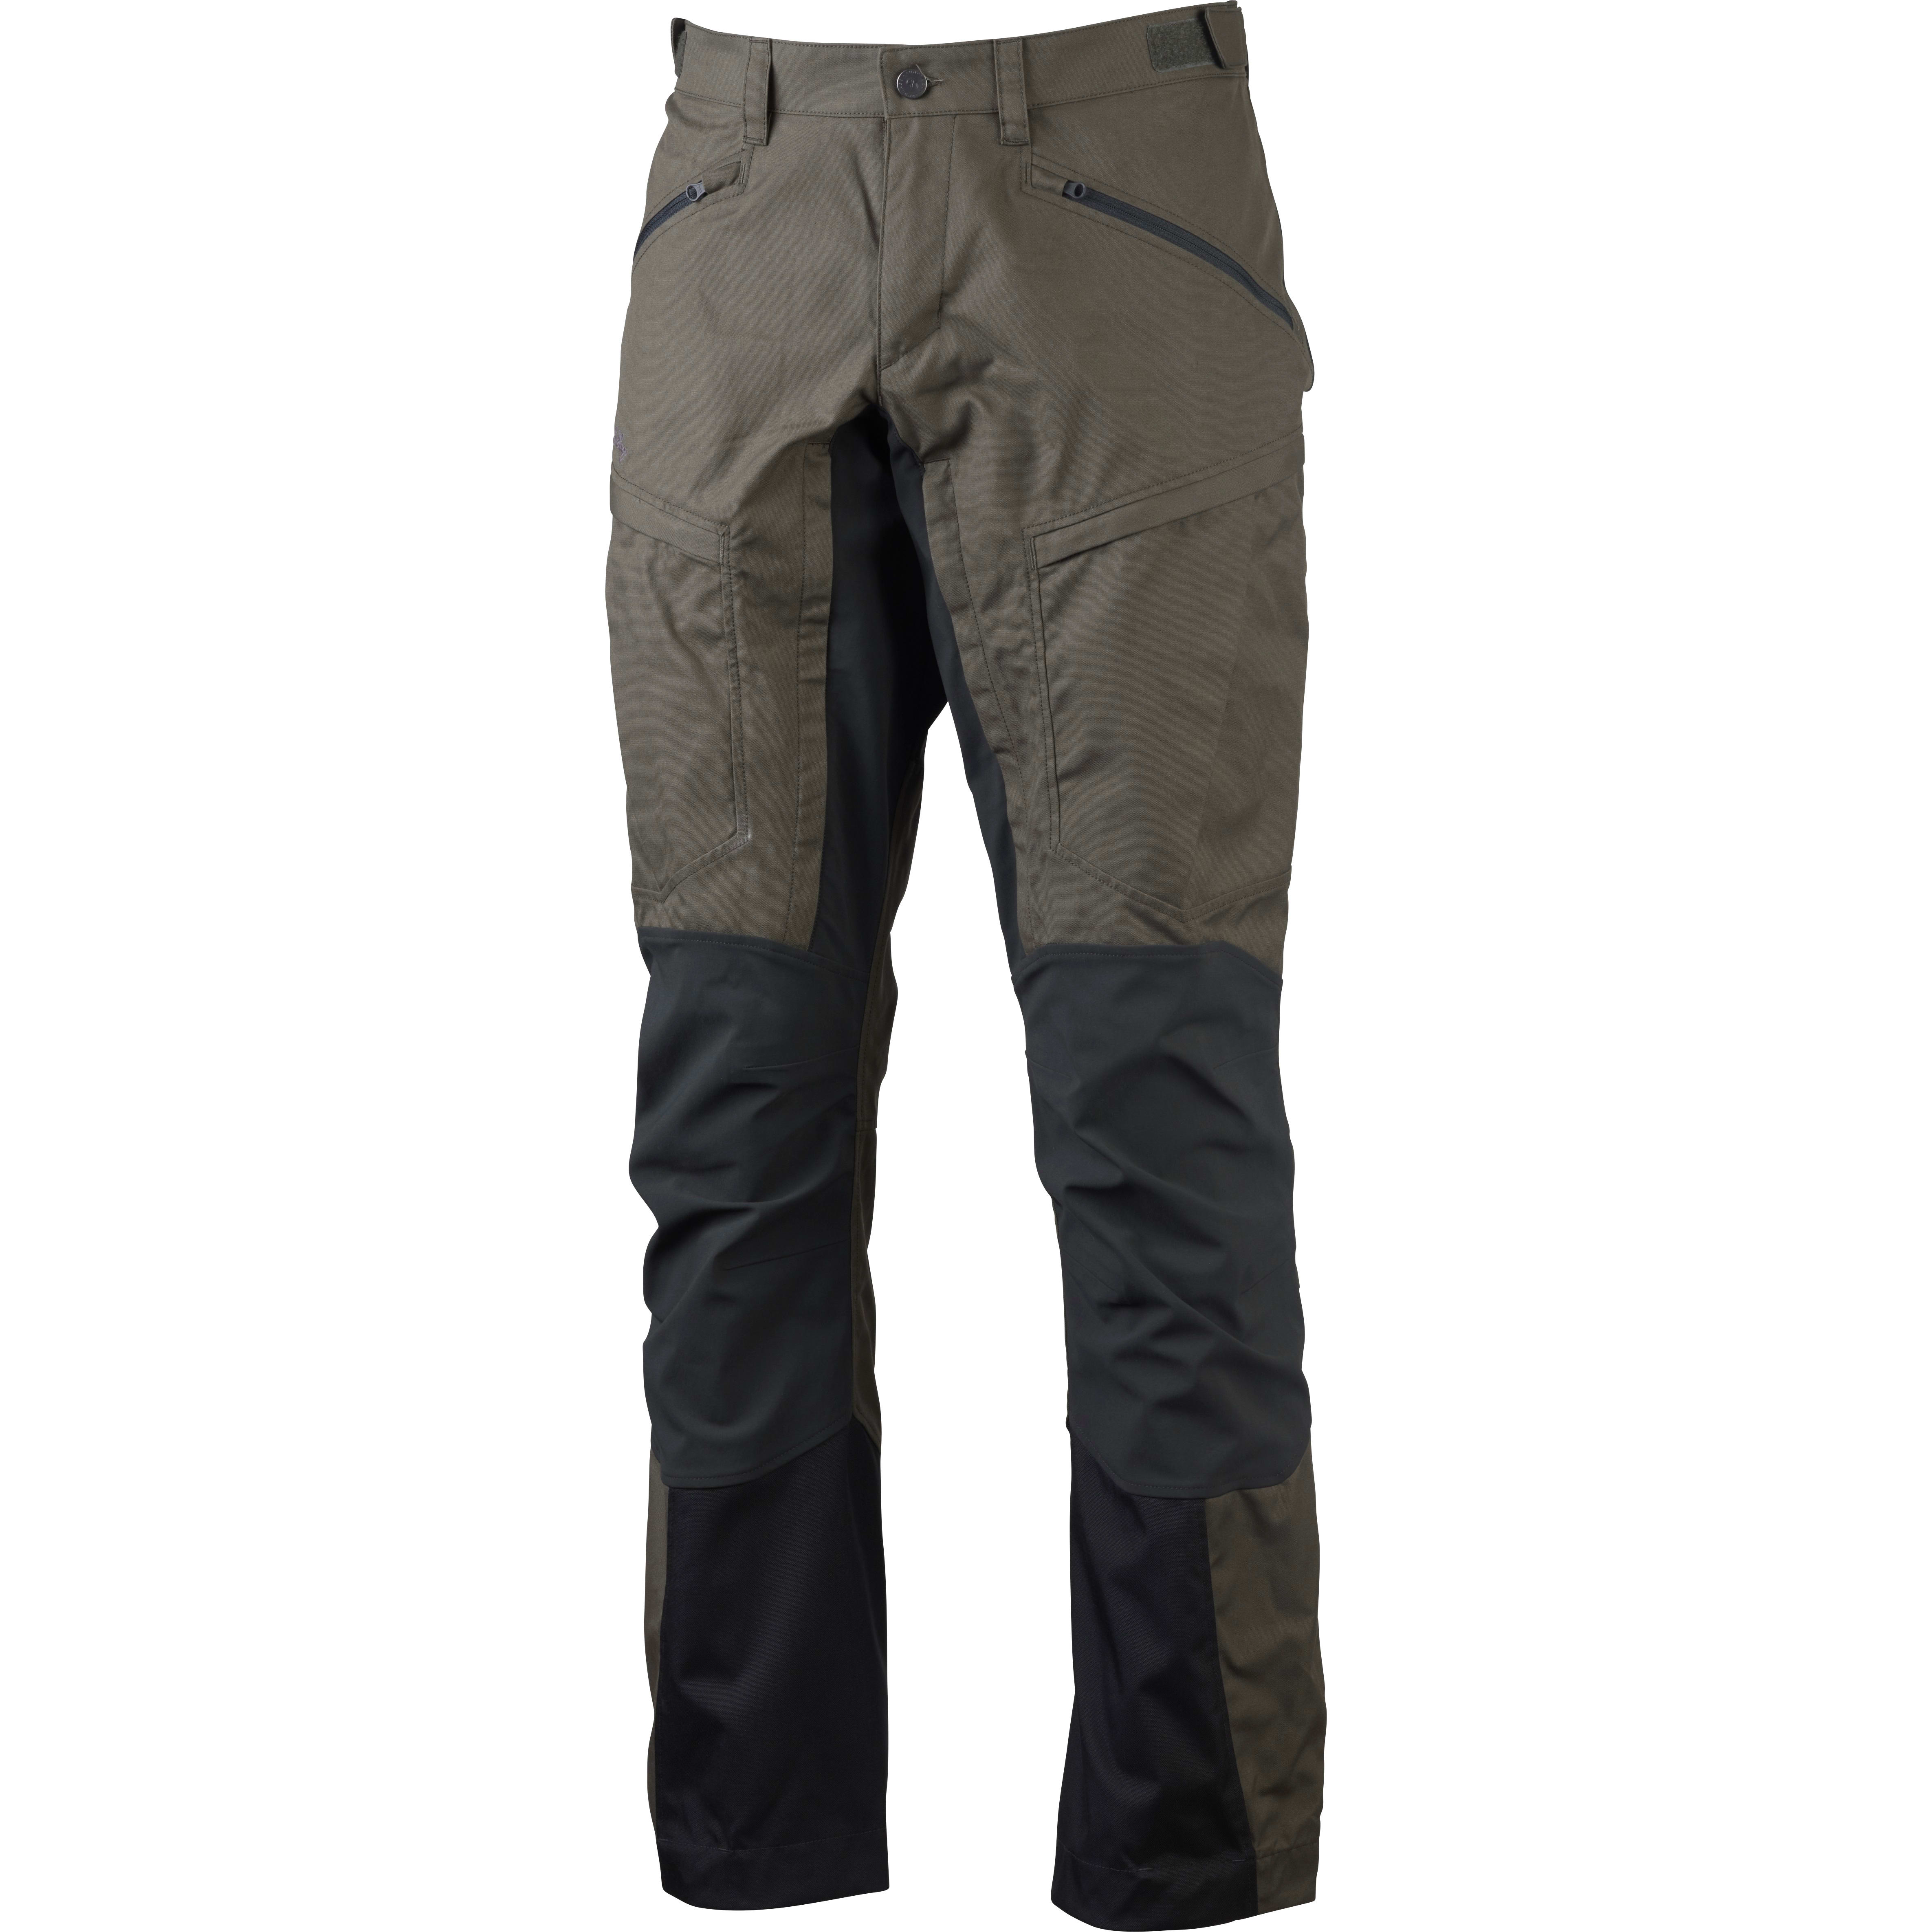 Buy Lundhags Makke Pro Men's Pant from Outnorth